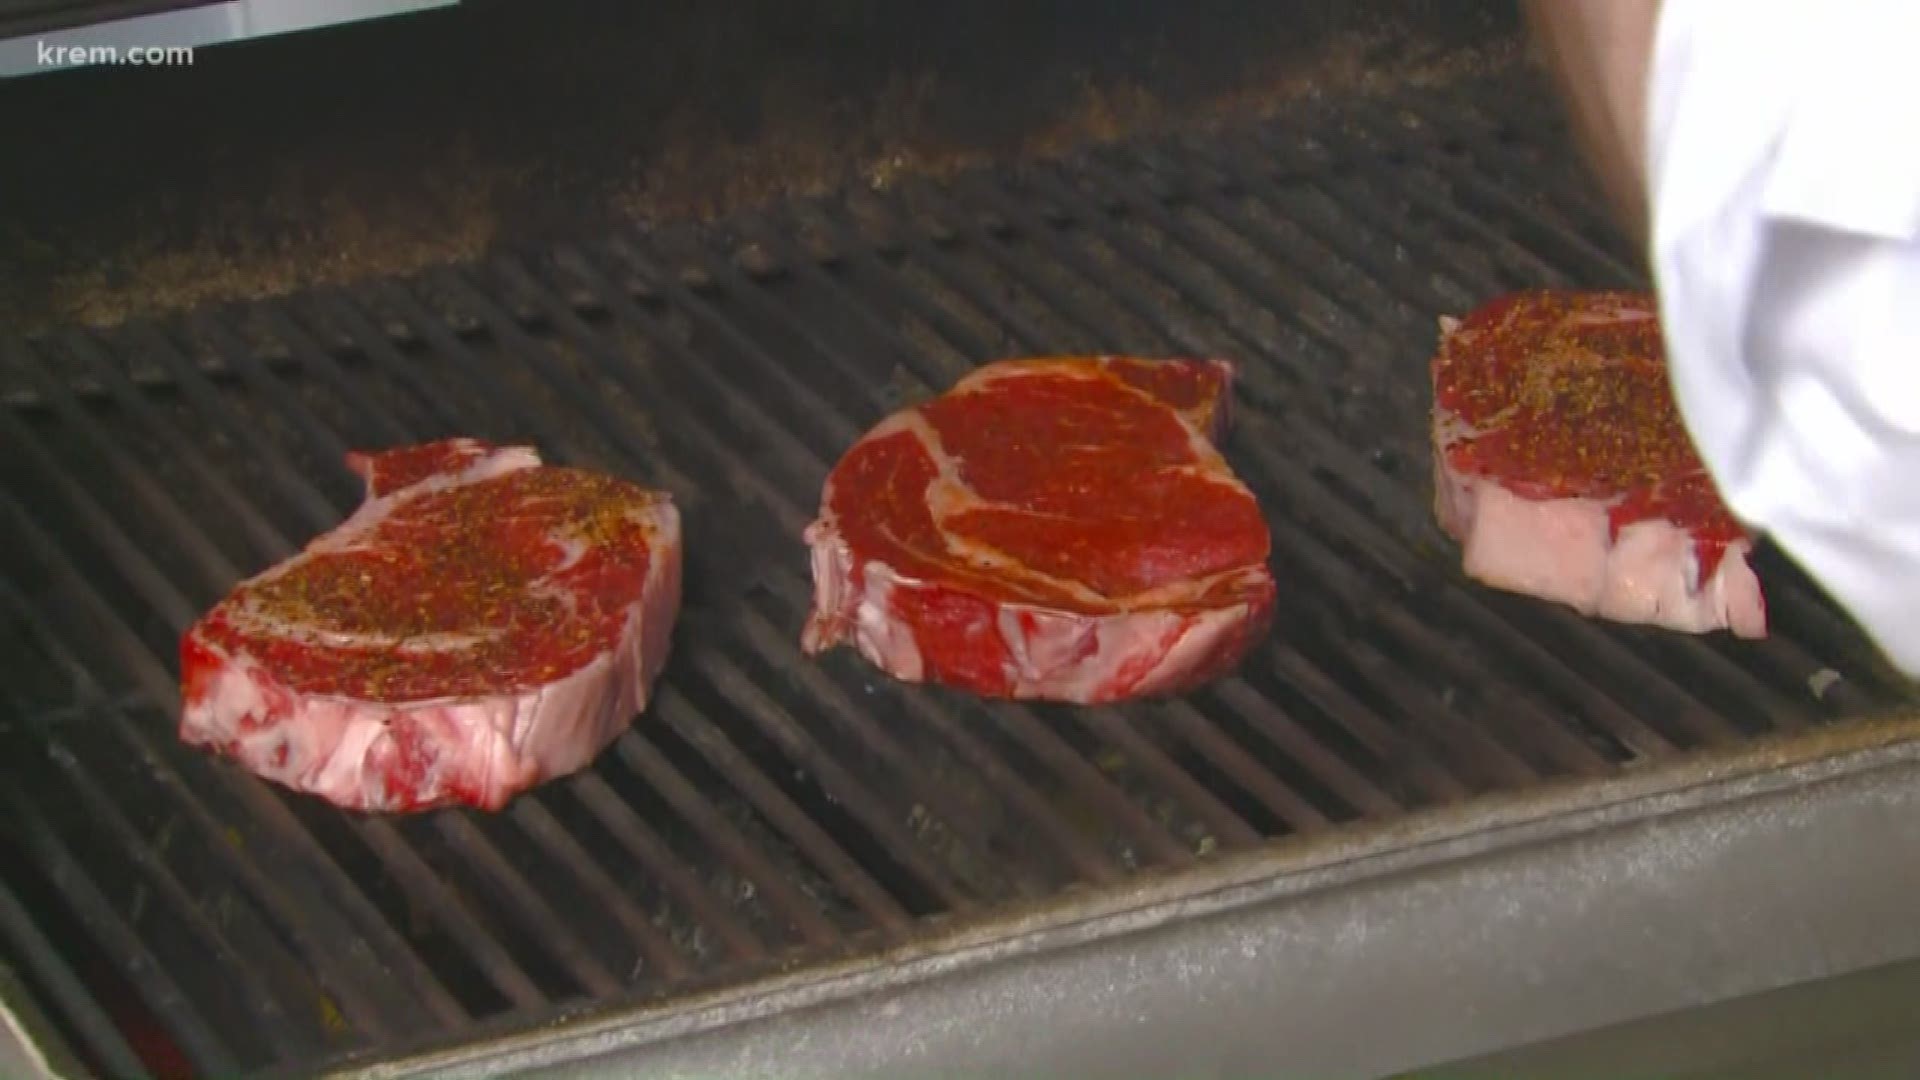 Craving a good steak? Look no further than this recipe from Tom Sherry's BBQ Forecast on May 28, 2020